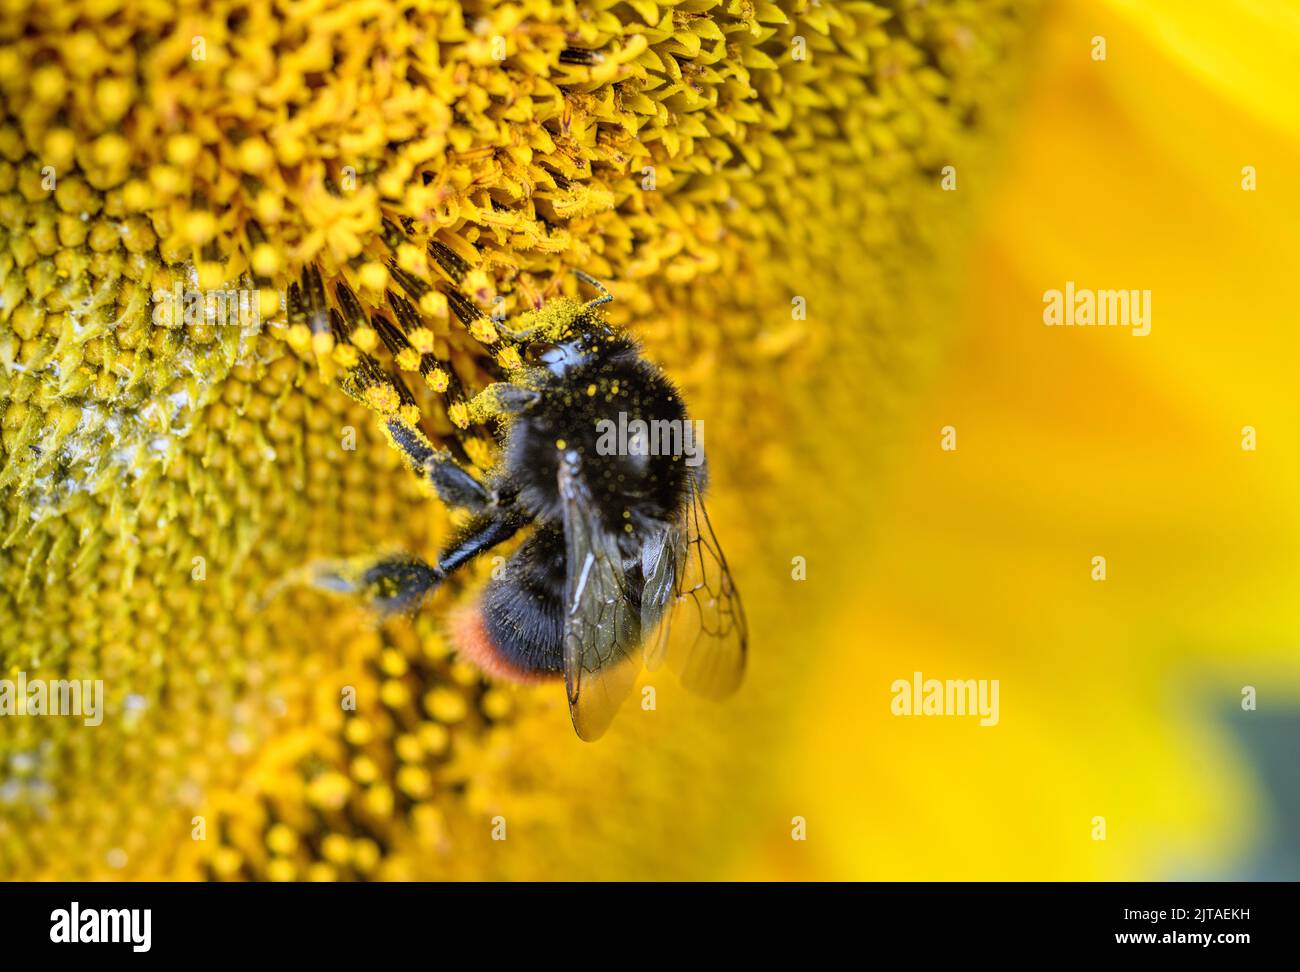 A bee in a wild garden with sunflowers, UK. Stock Photo